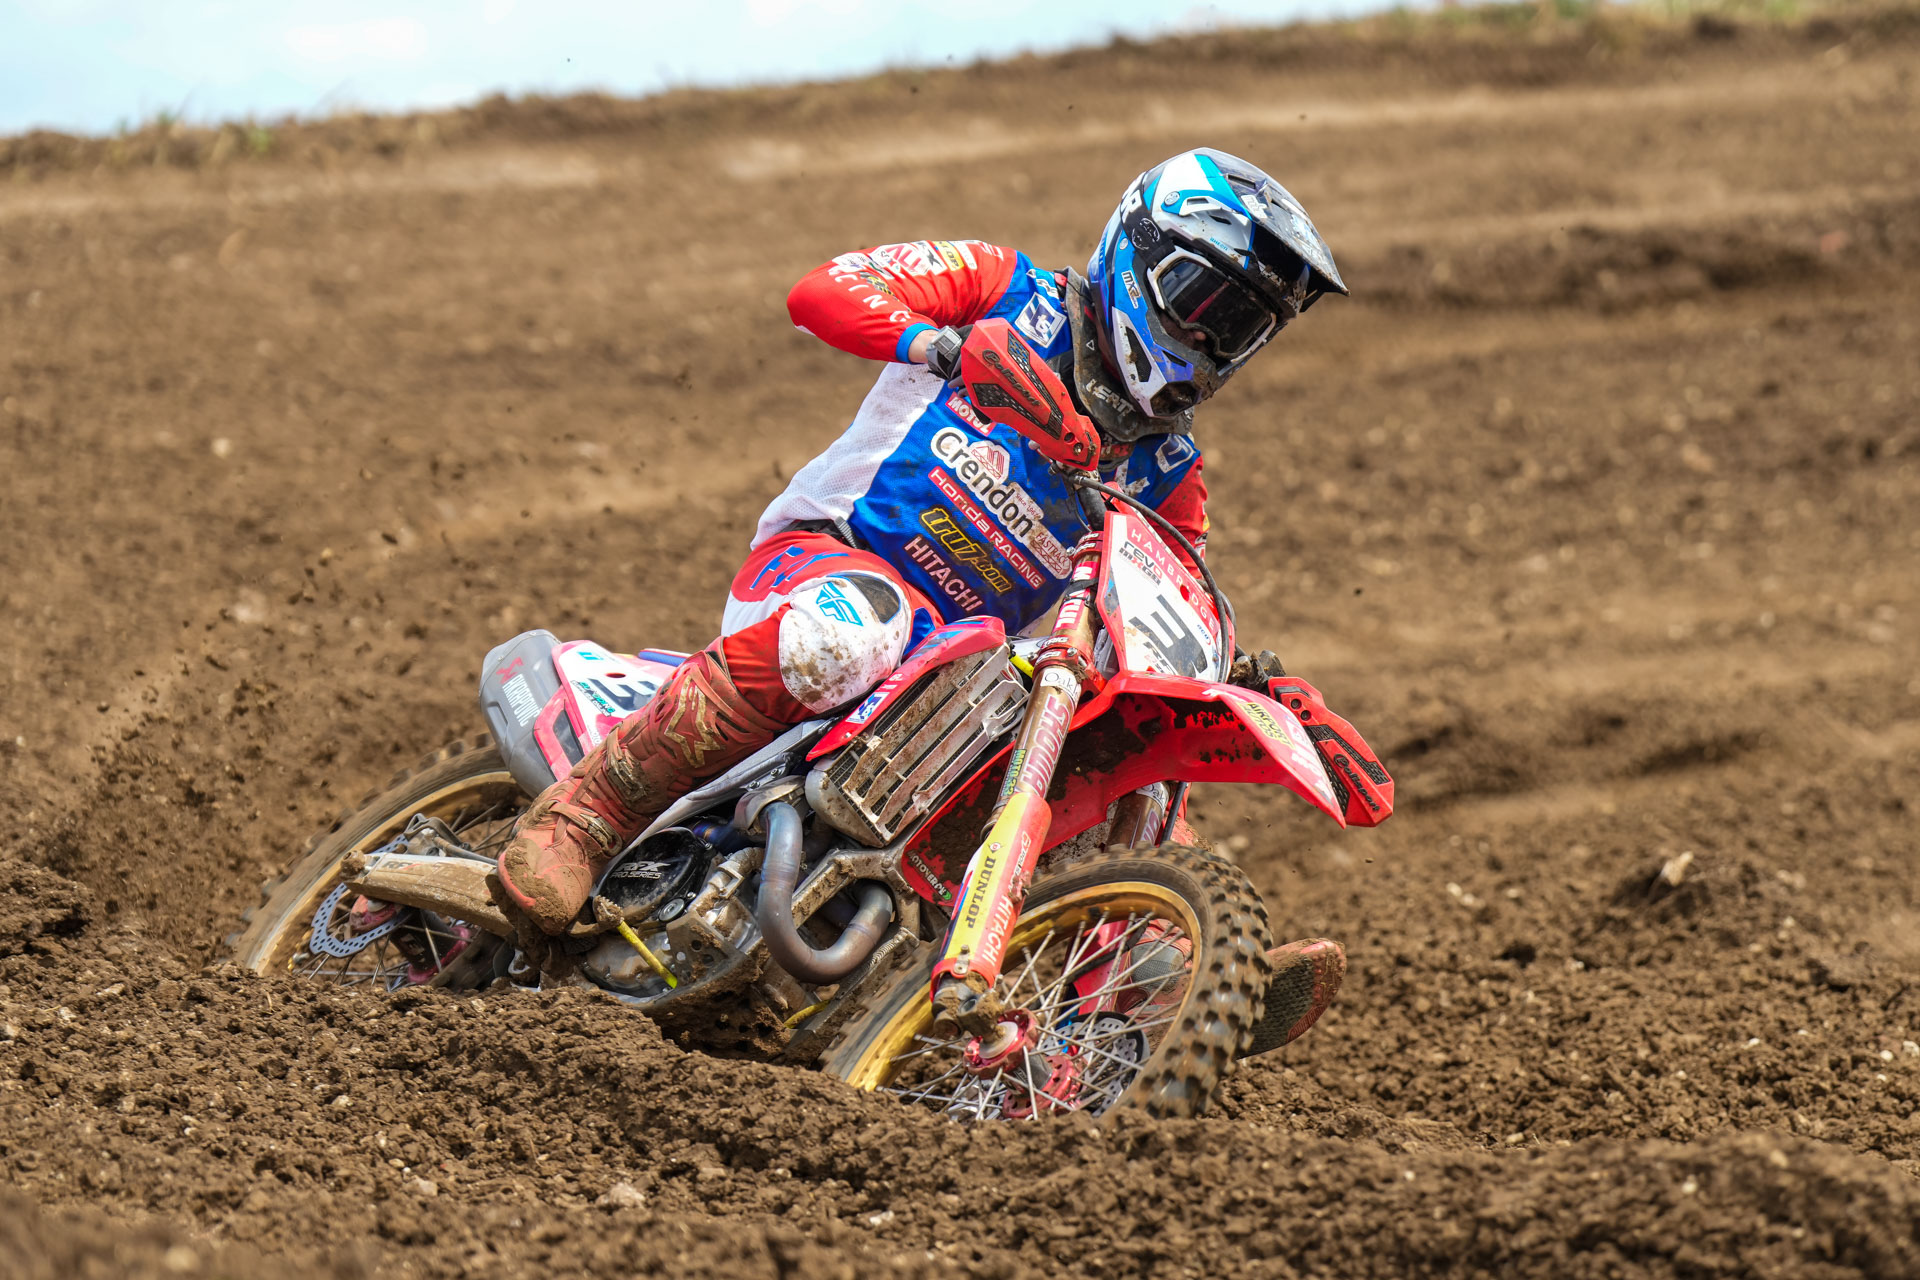 Gilbert’s MX Nationals winning run continues but Mewse still leads the series